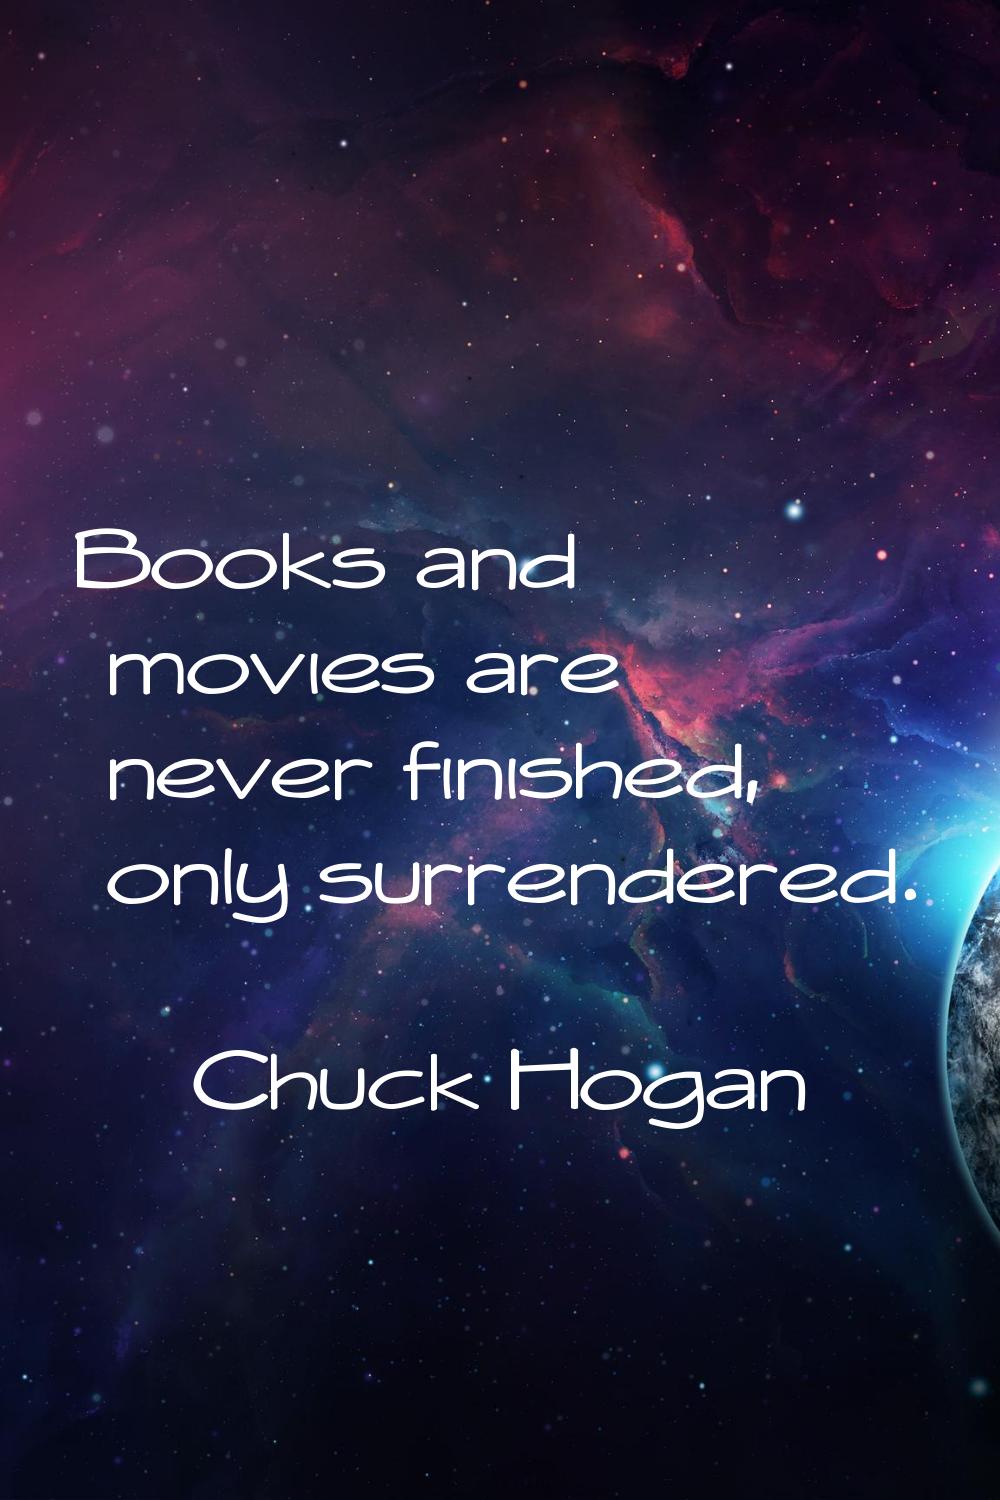 Books and movies are never finished, only surrendered.